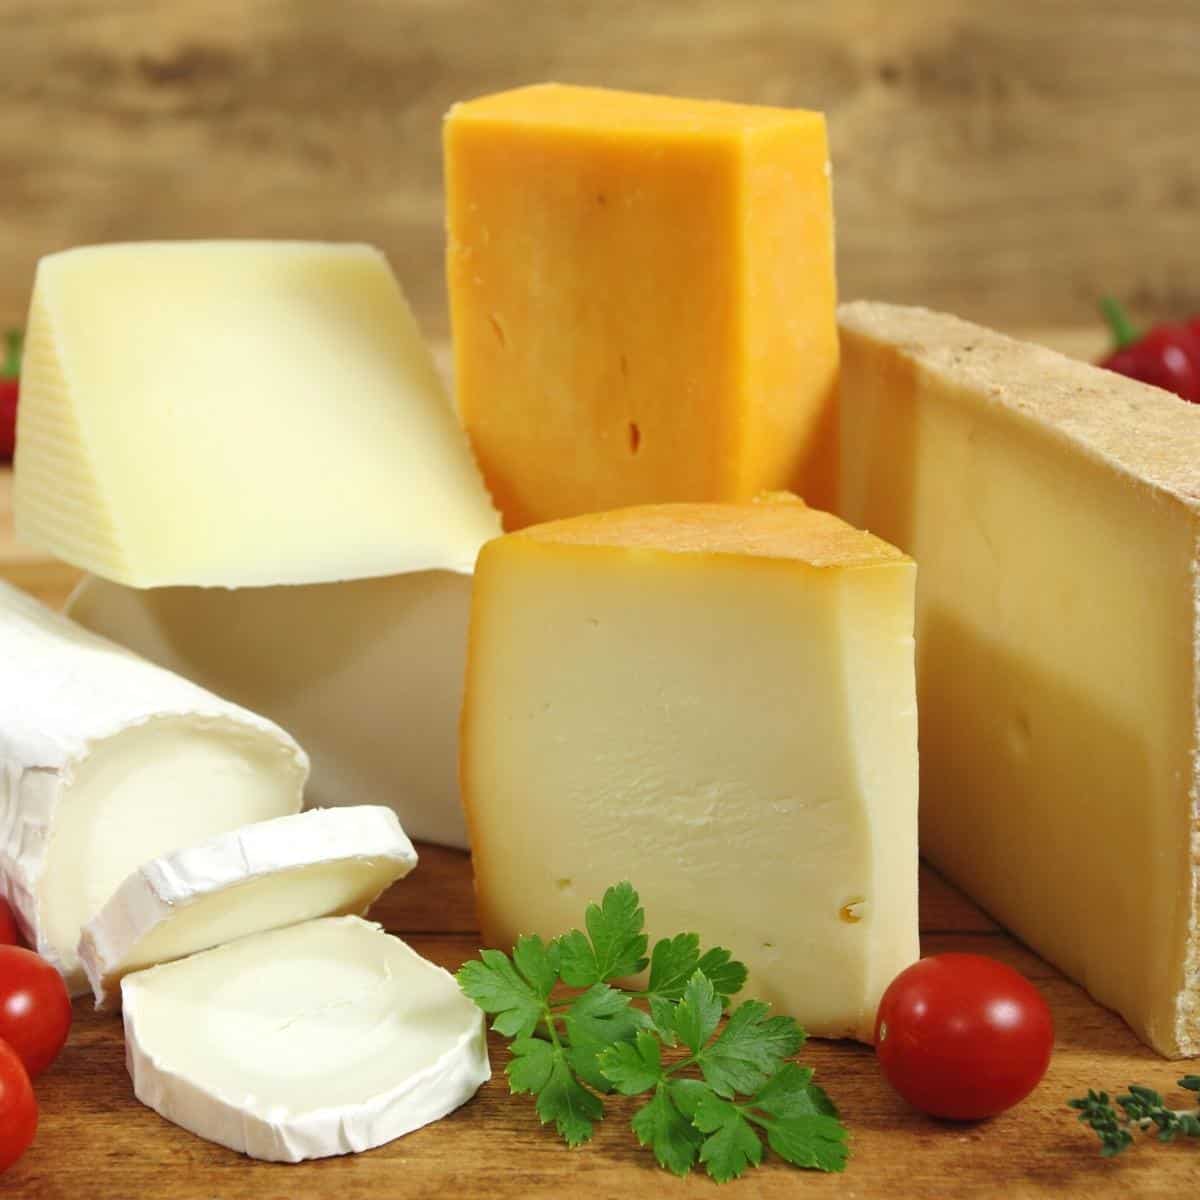 A stack of different types of cheese.